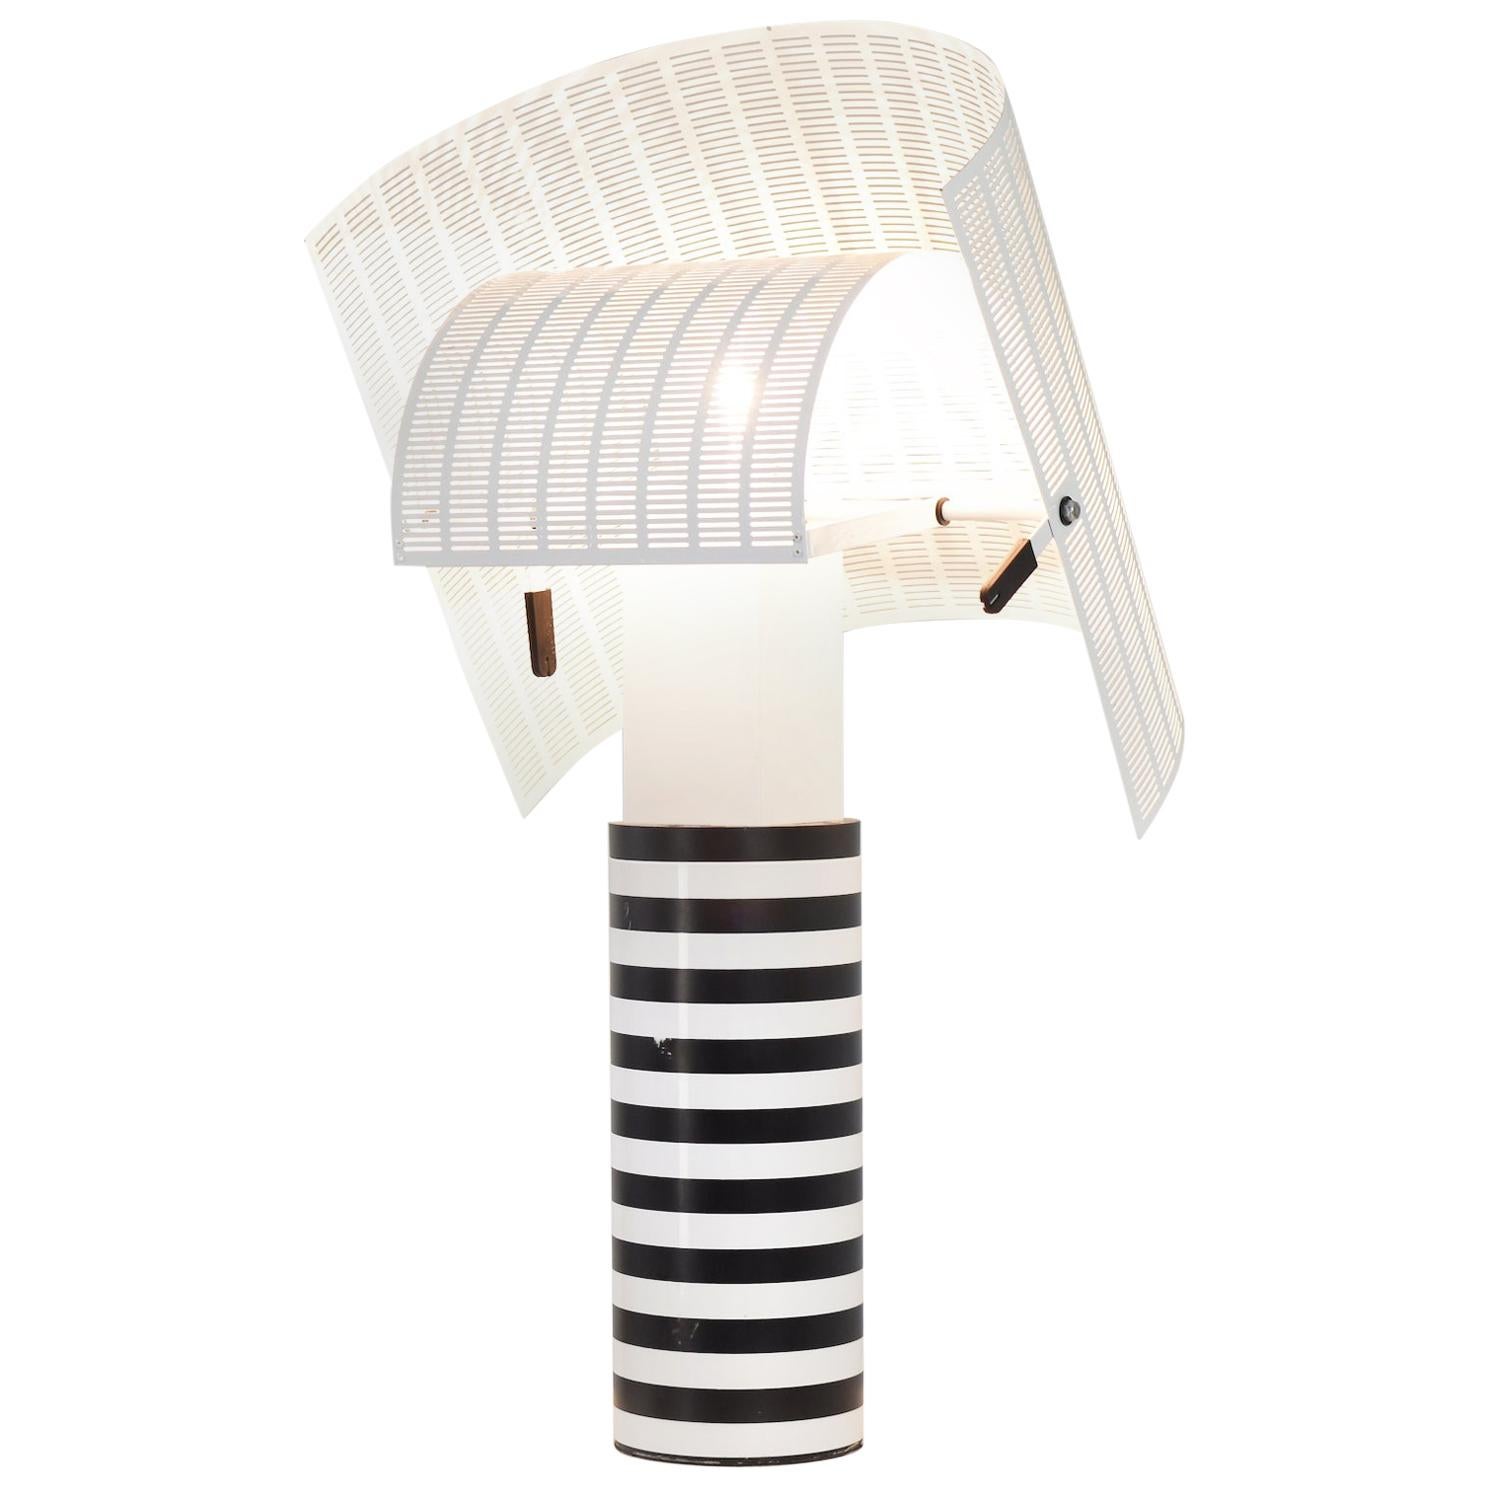 Early Edition of This ‘Shogun’ Table Lamp by Mario Botta for Artemide, Italy 197